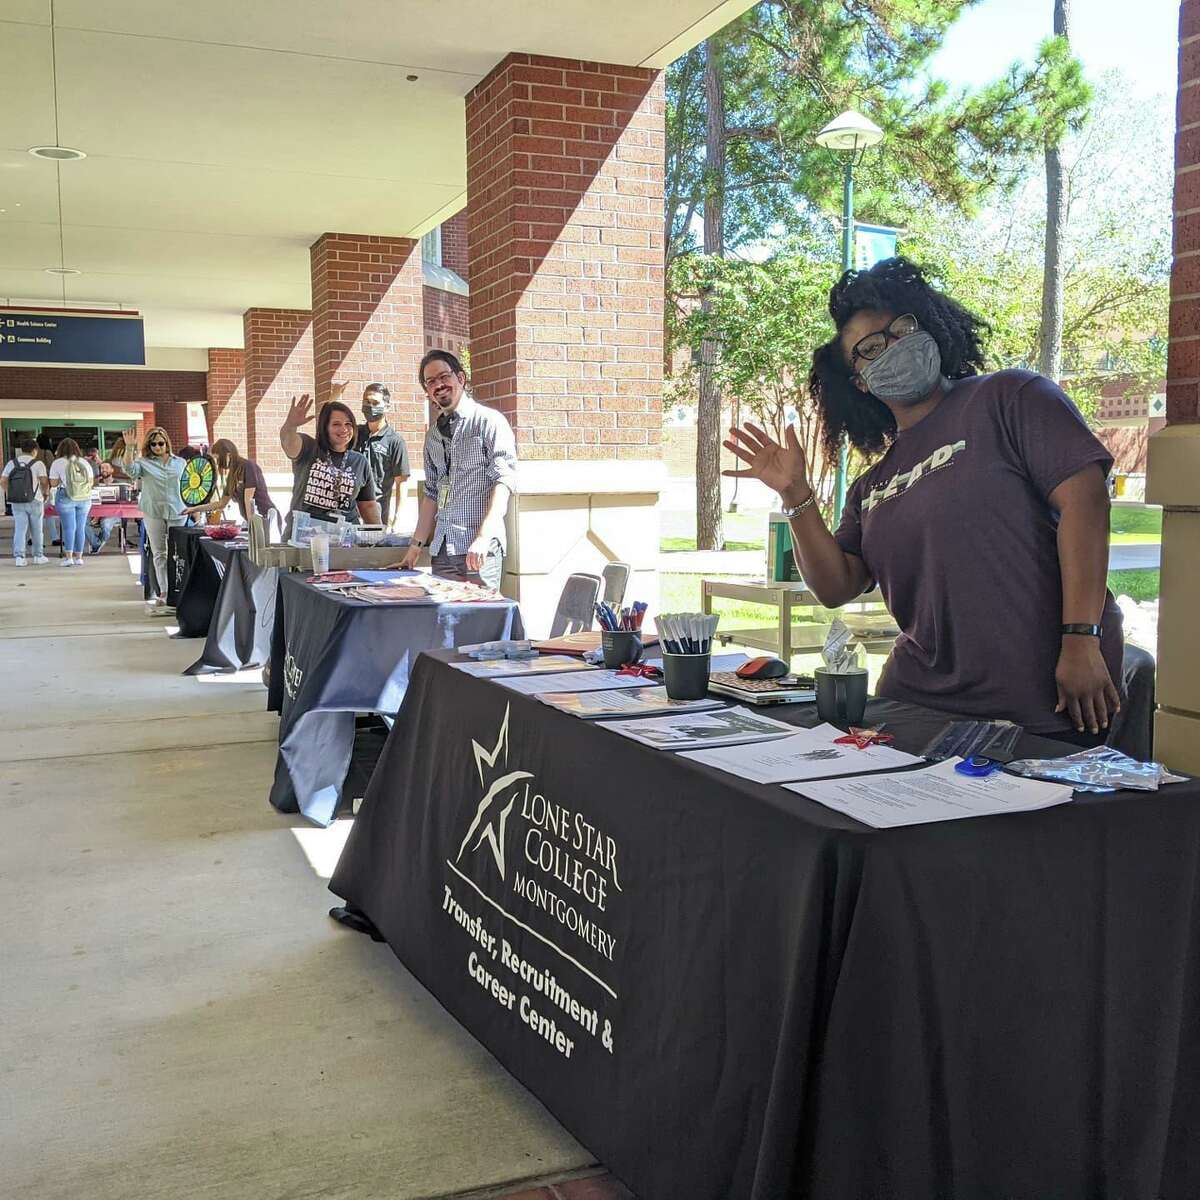 Lone Star College campuses introducing new events, activities